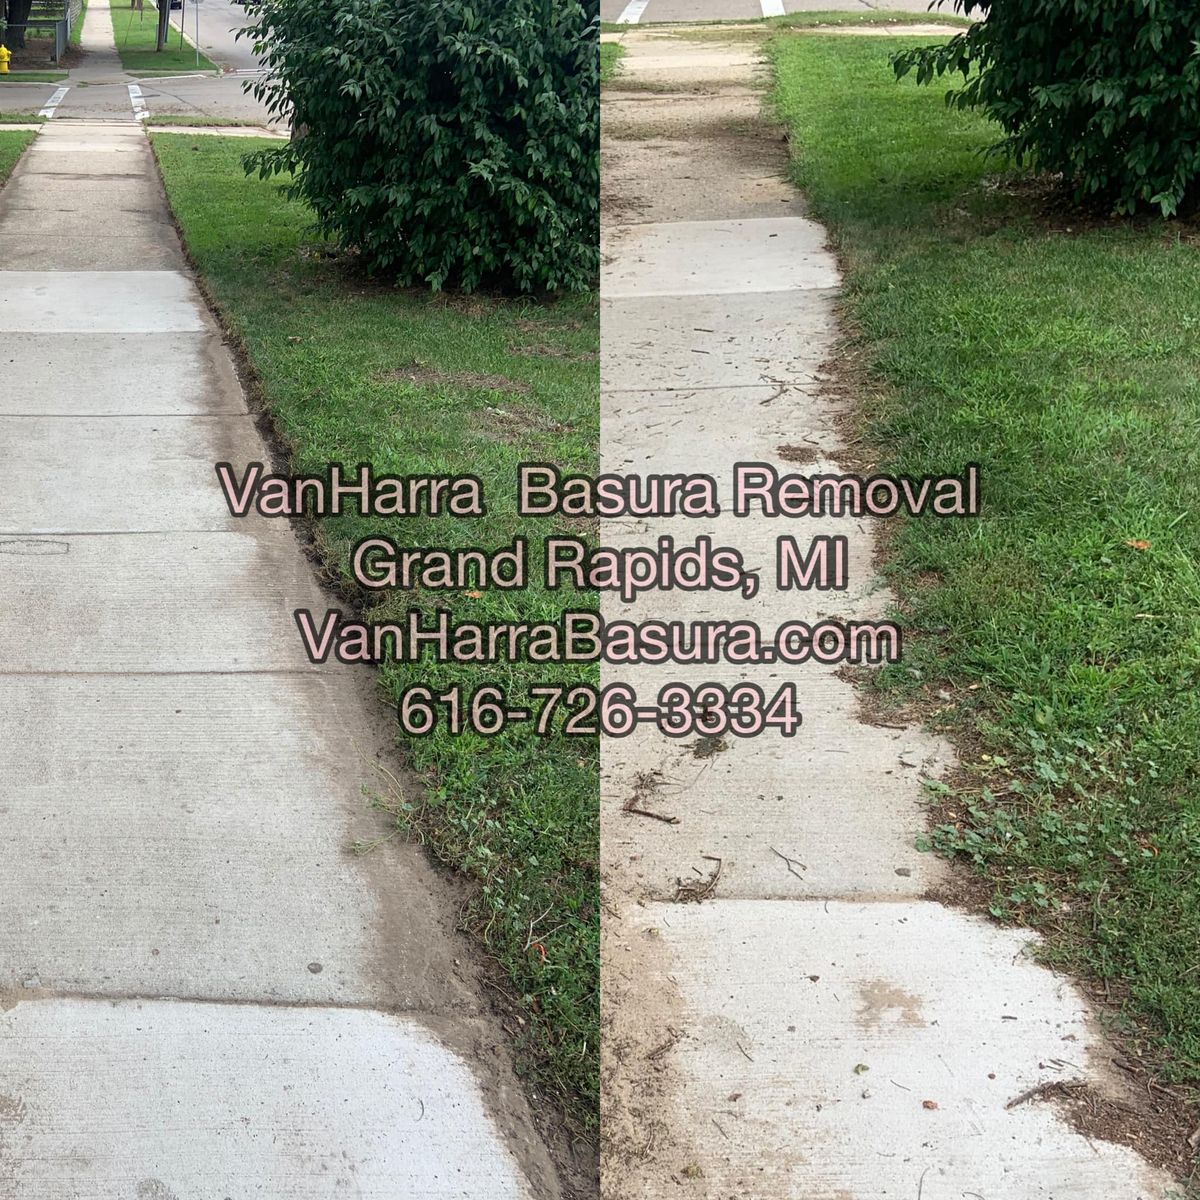 Power Washing for VanHarra Basura Junk Removal and Hauling in Grand Rapids, MI